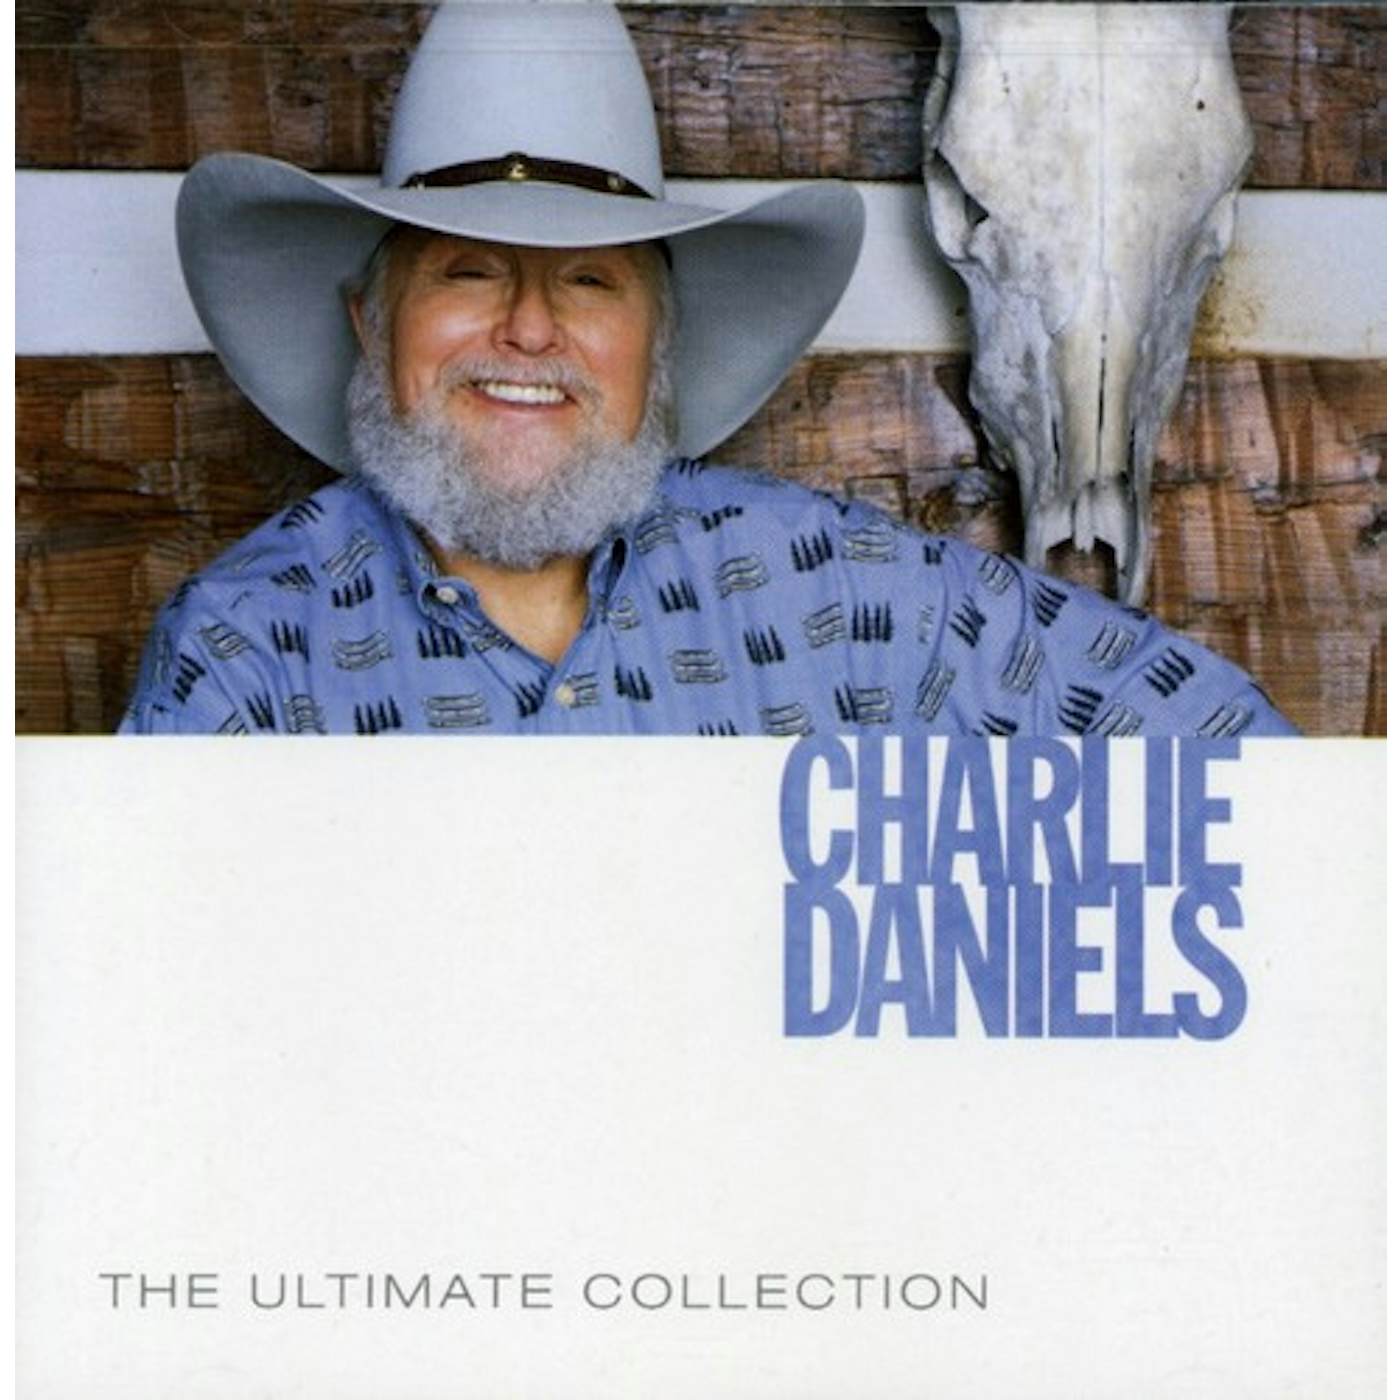 Charlie Daniels ULTIMATE COLLECTION CD